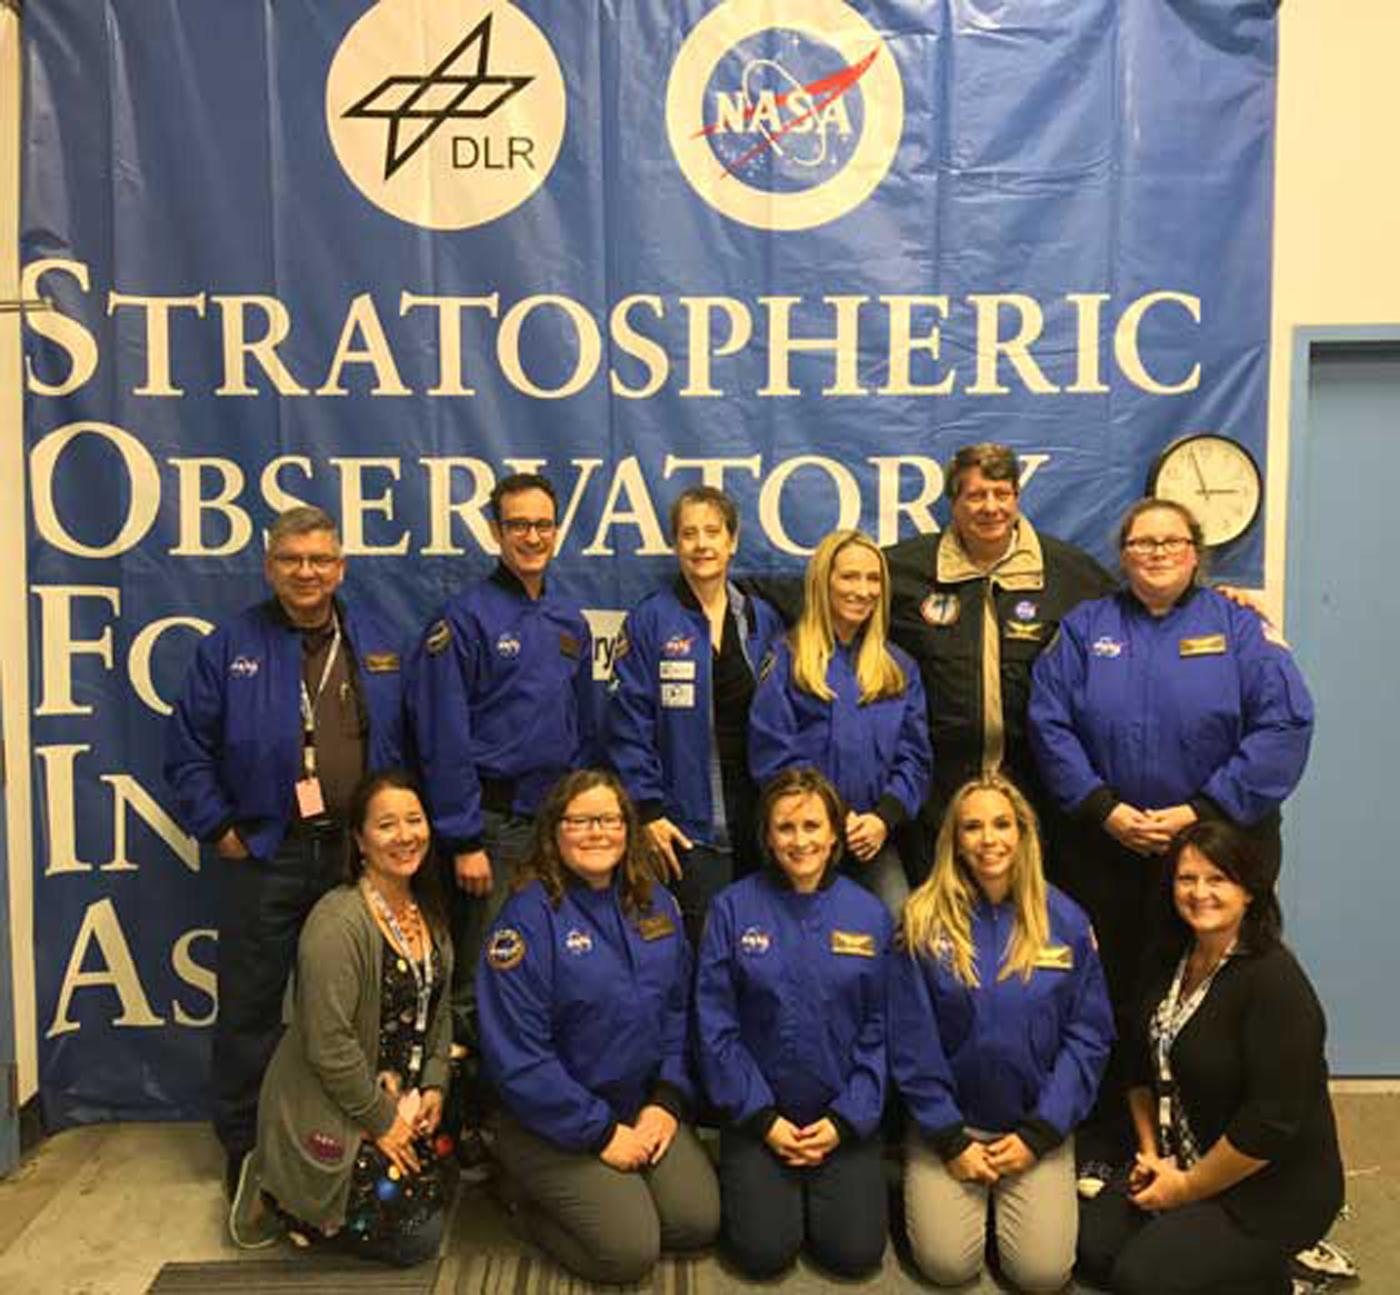 Airborne Astronomy Ambassadors 2017: First row: Jessica Yett, Caylin Ledterman, Lydia Jimenez, Christine Hirst, Kellie Fleming Second row: Jorge Hirmas, Justin Fournier, Pamela Harman, Sarah Arndt, Dana Backman, Kirstin DeGeer. Jessica and Kellie are AAA - District  Liaisons. Click to see the large picture